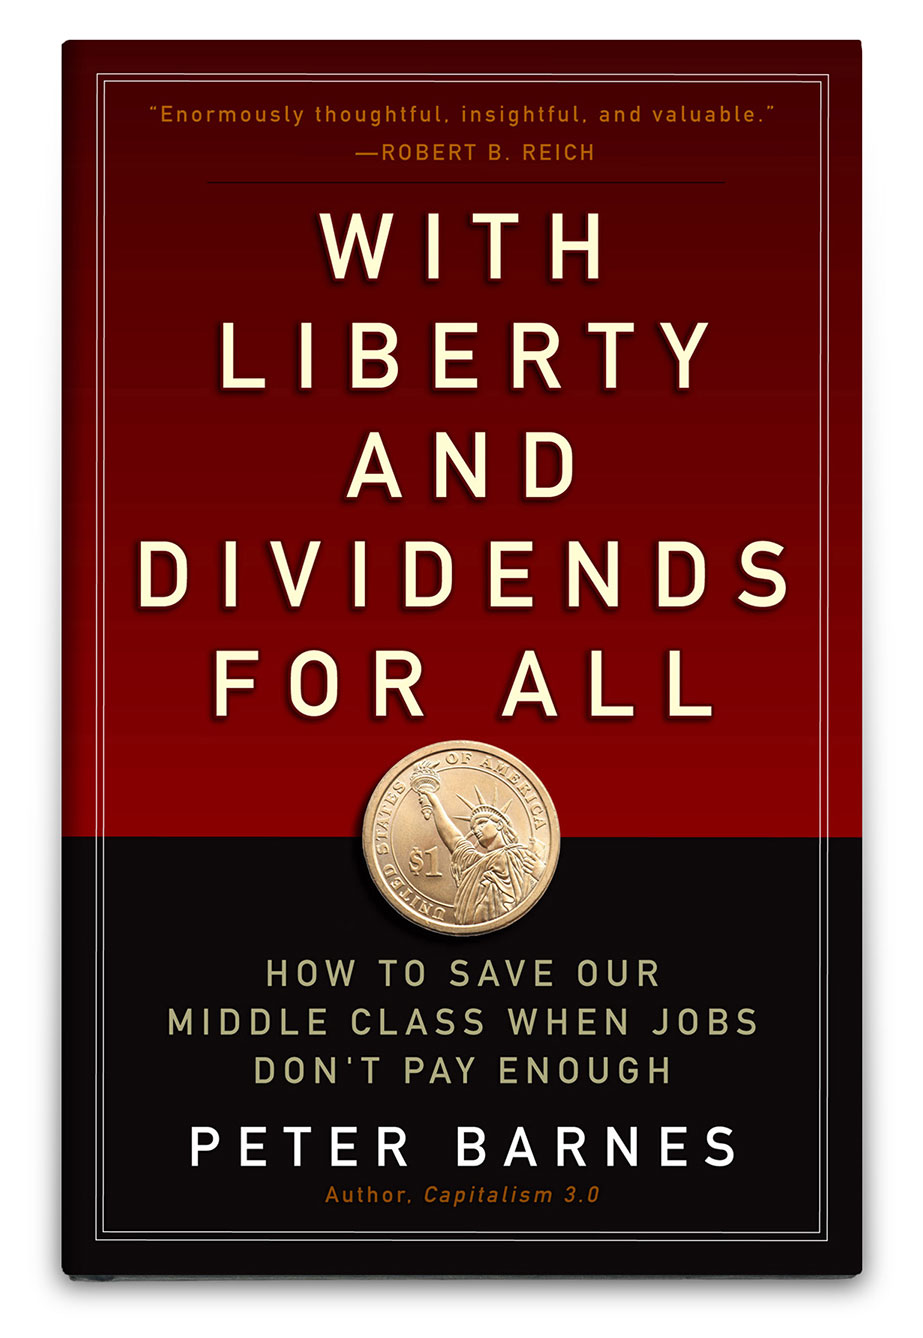 WITH LIBERTY AND DIVIDENDS FOR ALL